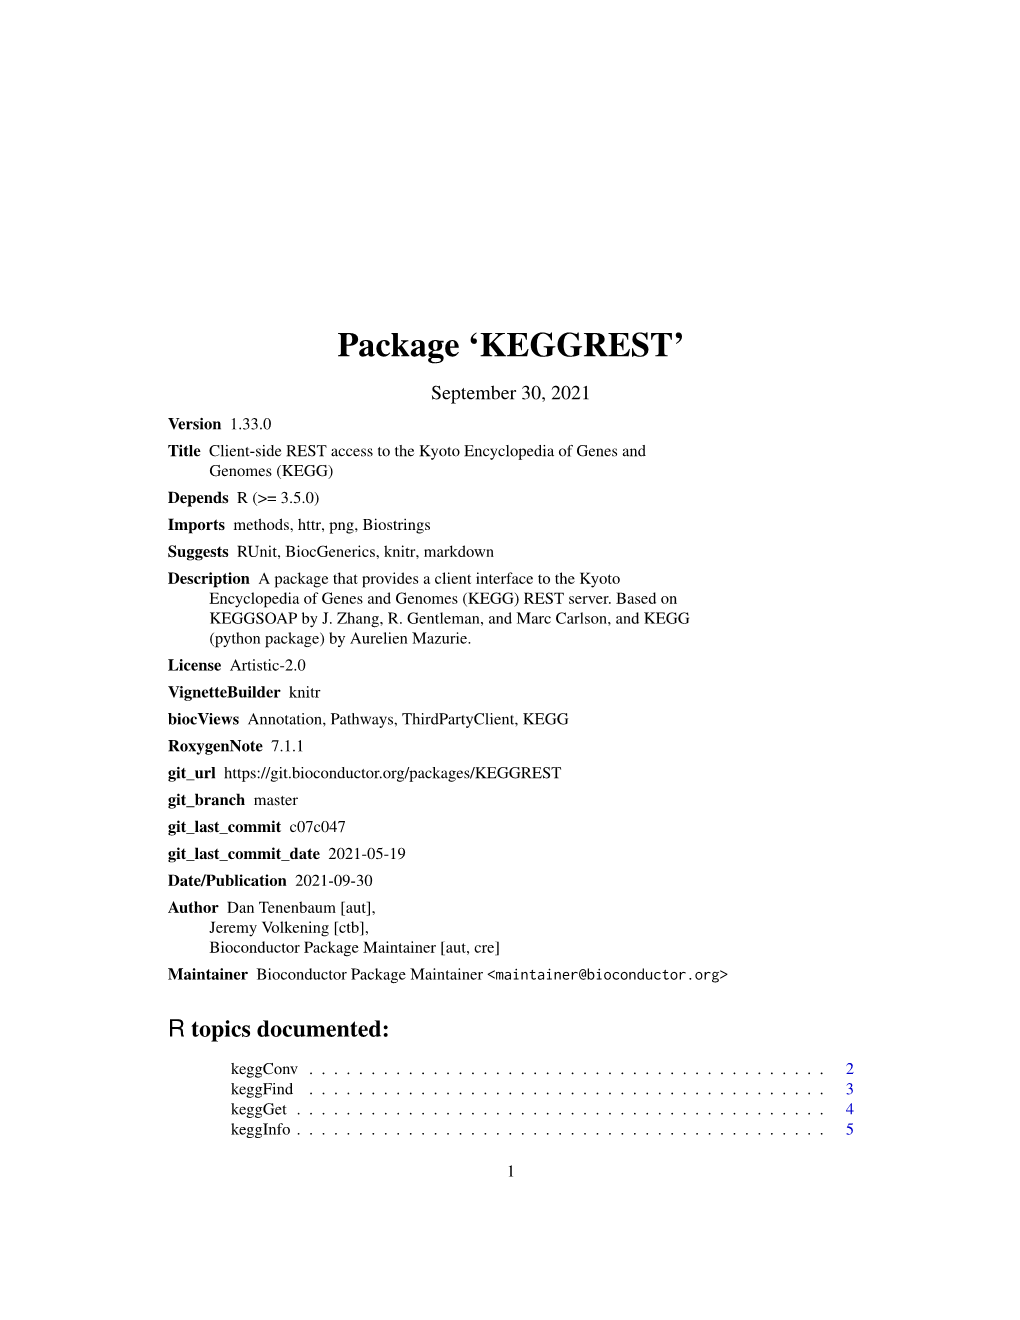 KEGGREST: Client-Side REST Access to the Kyoto Encyclopedia of Genes and Genomes (KEGG)